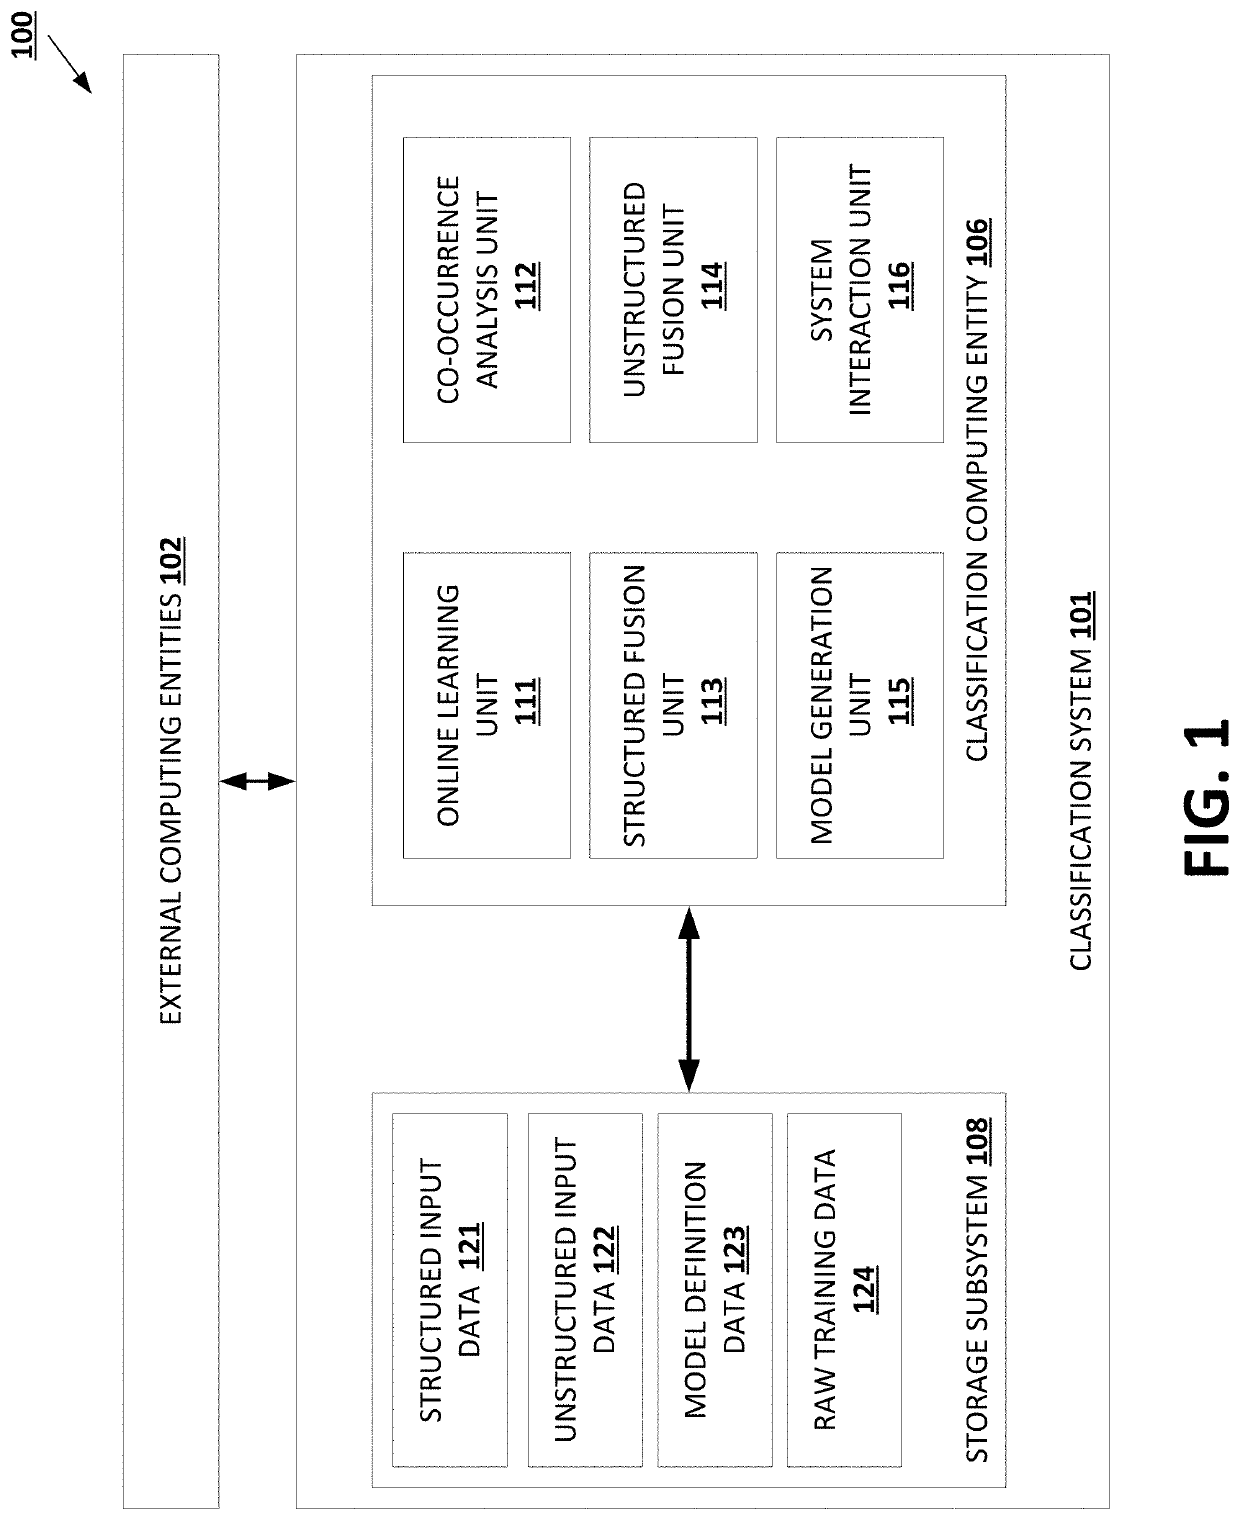 Classification in hierarchical prediction domains